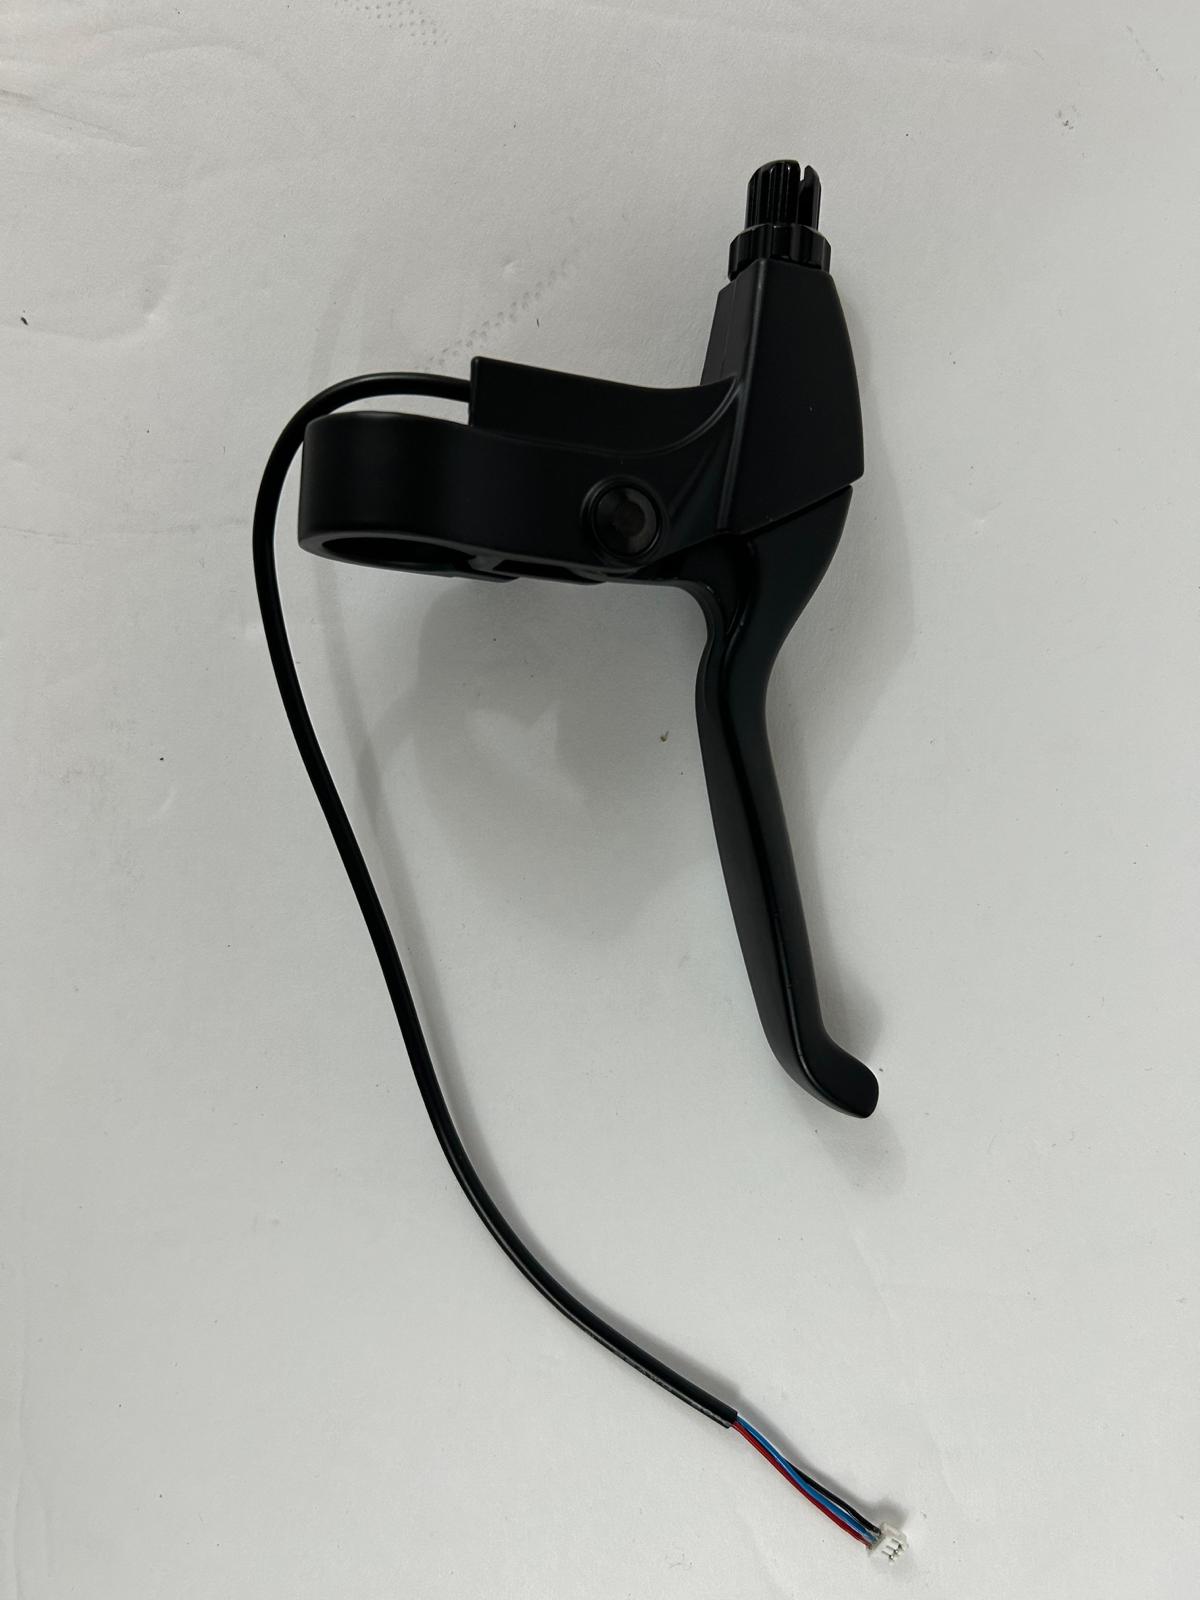 Right Brake Lever for Ninebot P65 Kick Scooters